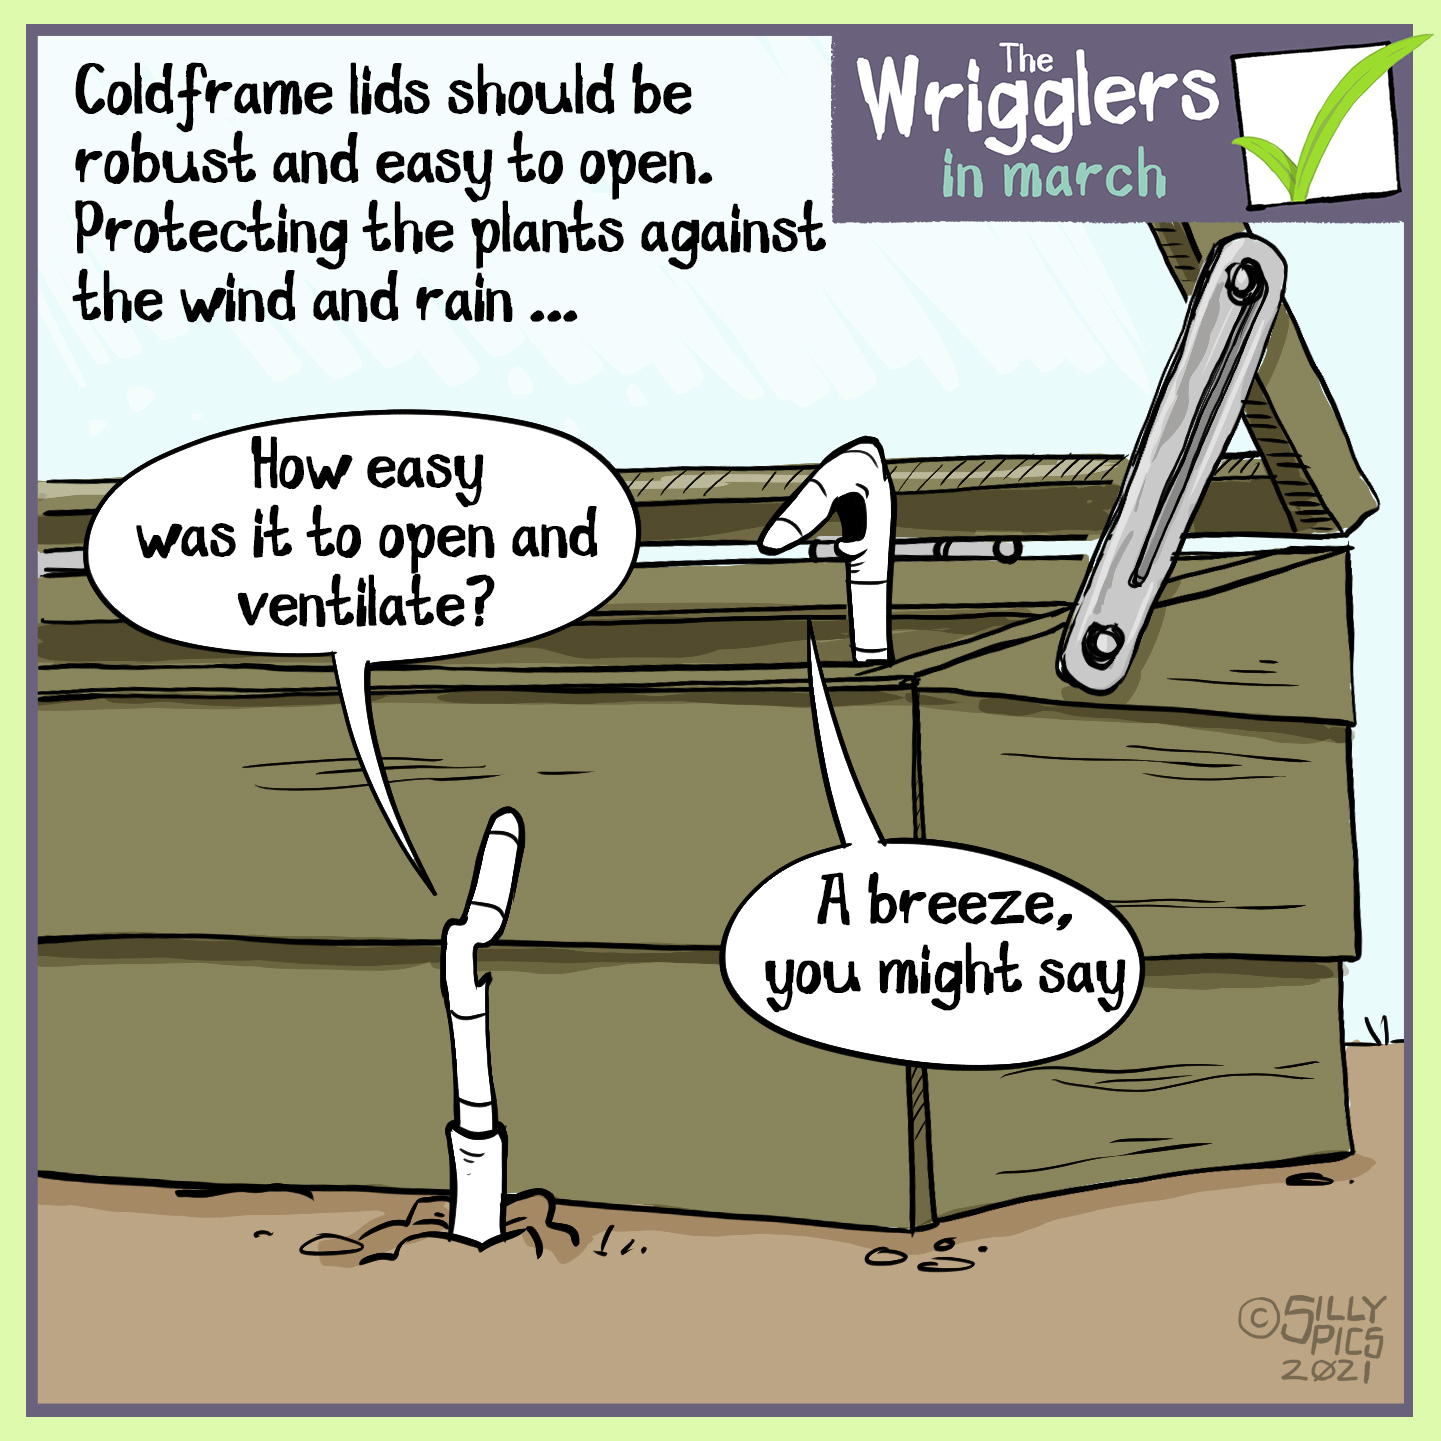 This cartoon is about cold frames being robust and easy to pen, to best protect plants fronm the wind and rain. Two worms are talking, one is in the ground outside the cold frame, the other is sitting on the rim of the cold frame, which is open. The worm on the groubnd says, " How easy was it to open and ventilate?" The other worm says, "A breeze, you might say."